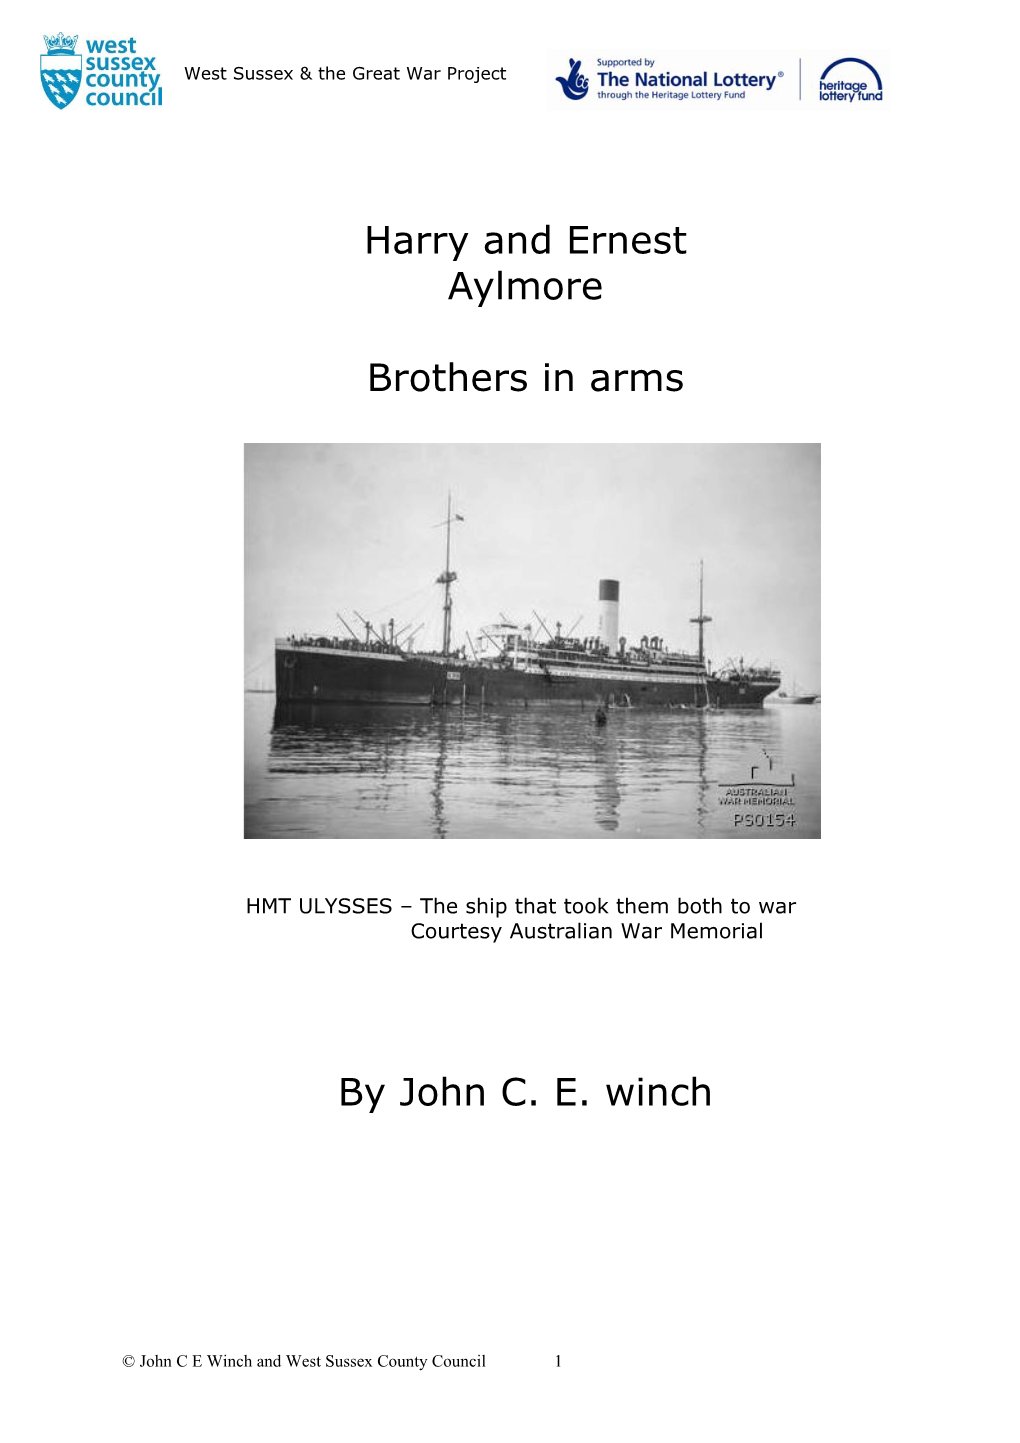 Harry and Ernest Aylmore Brothers in Arms